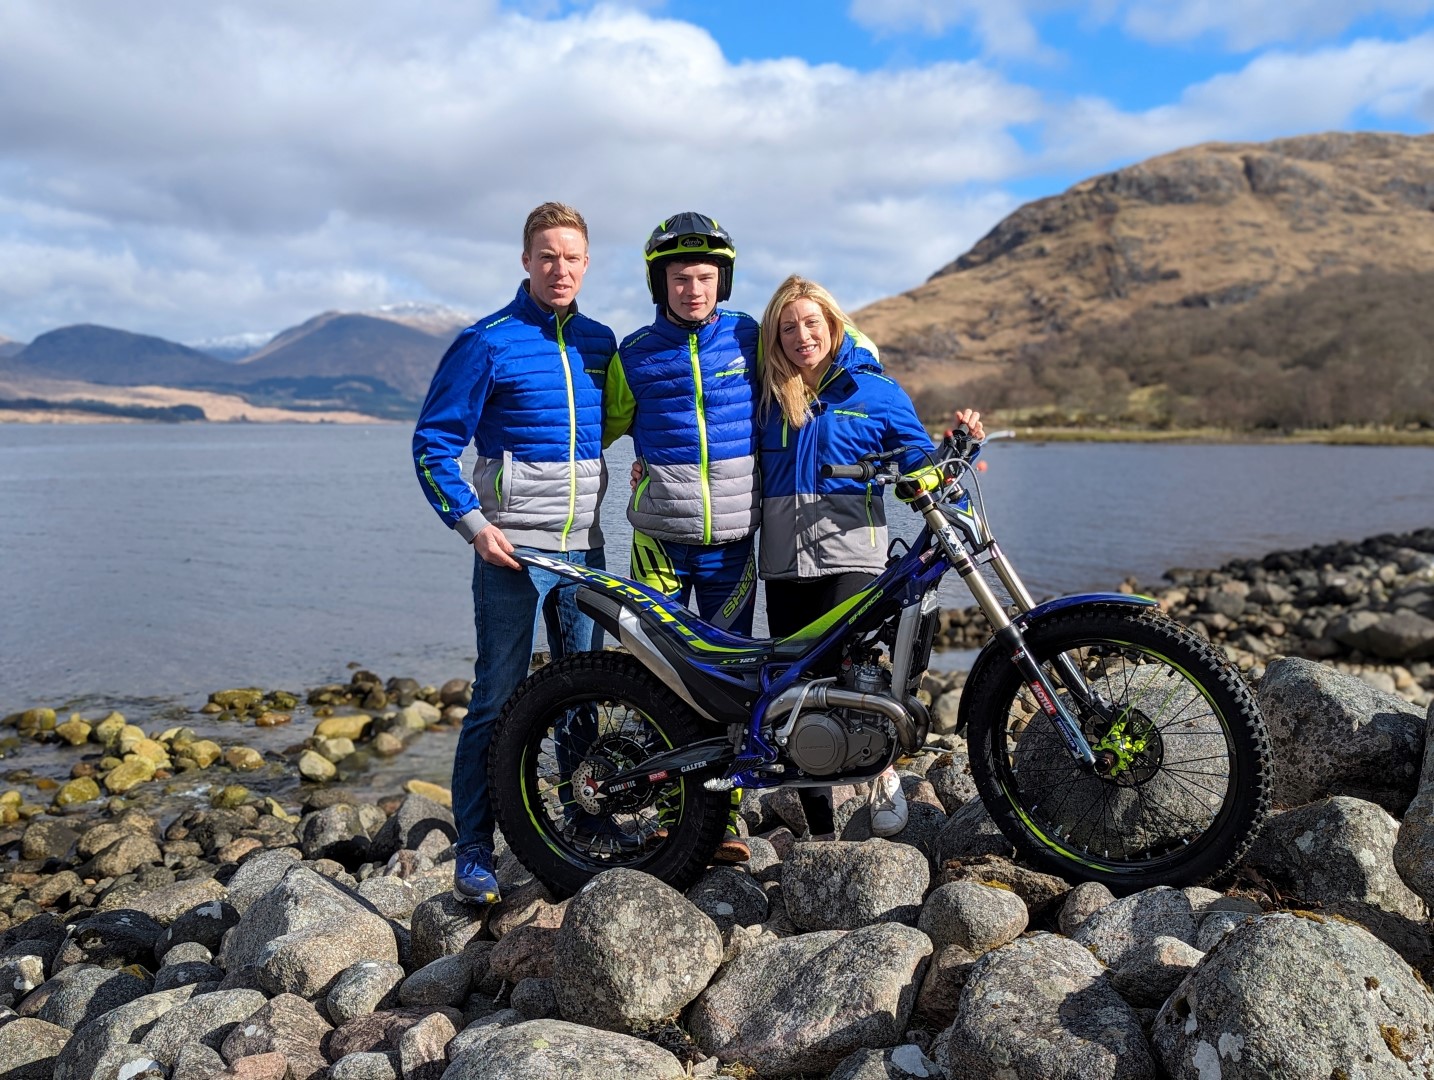 Evan Sim signs with Sherco